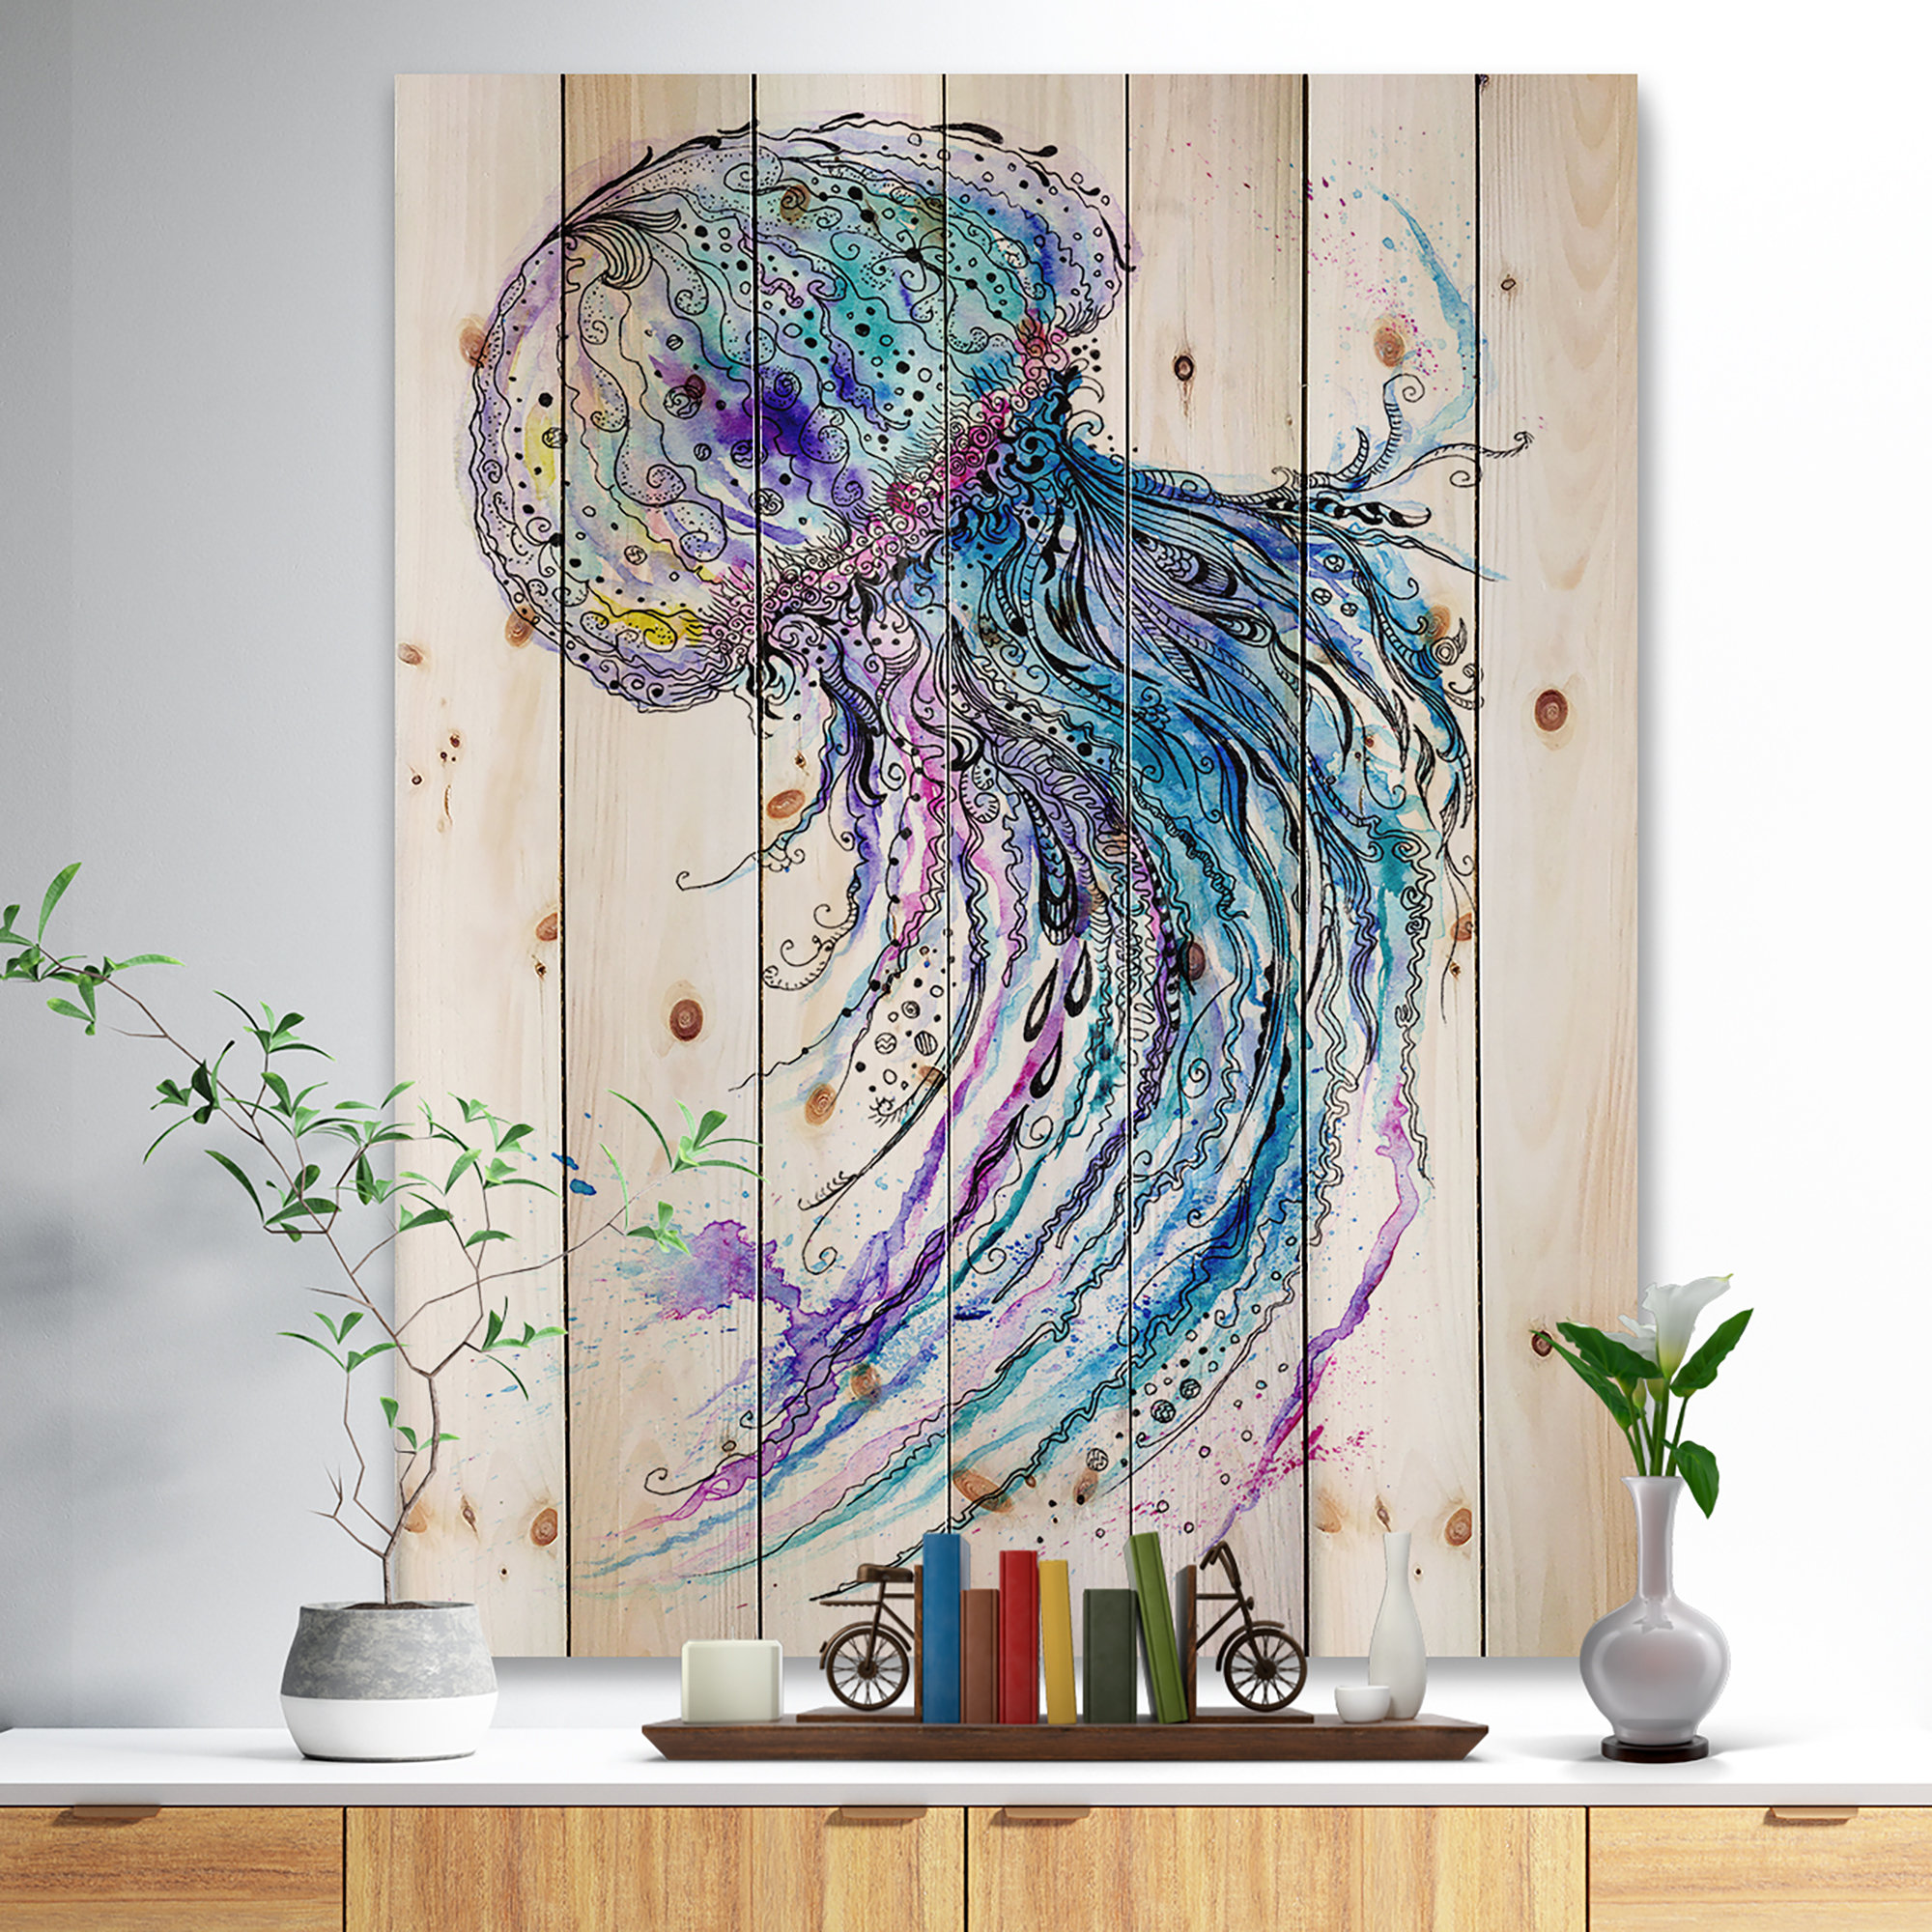 Highland Dunes Jelly Fish Watercolor On Wood Painting